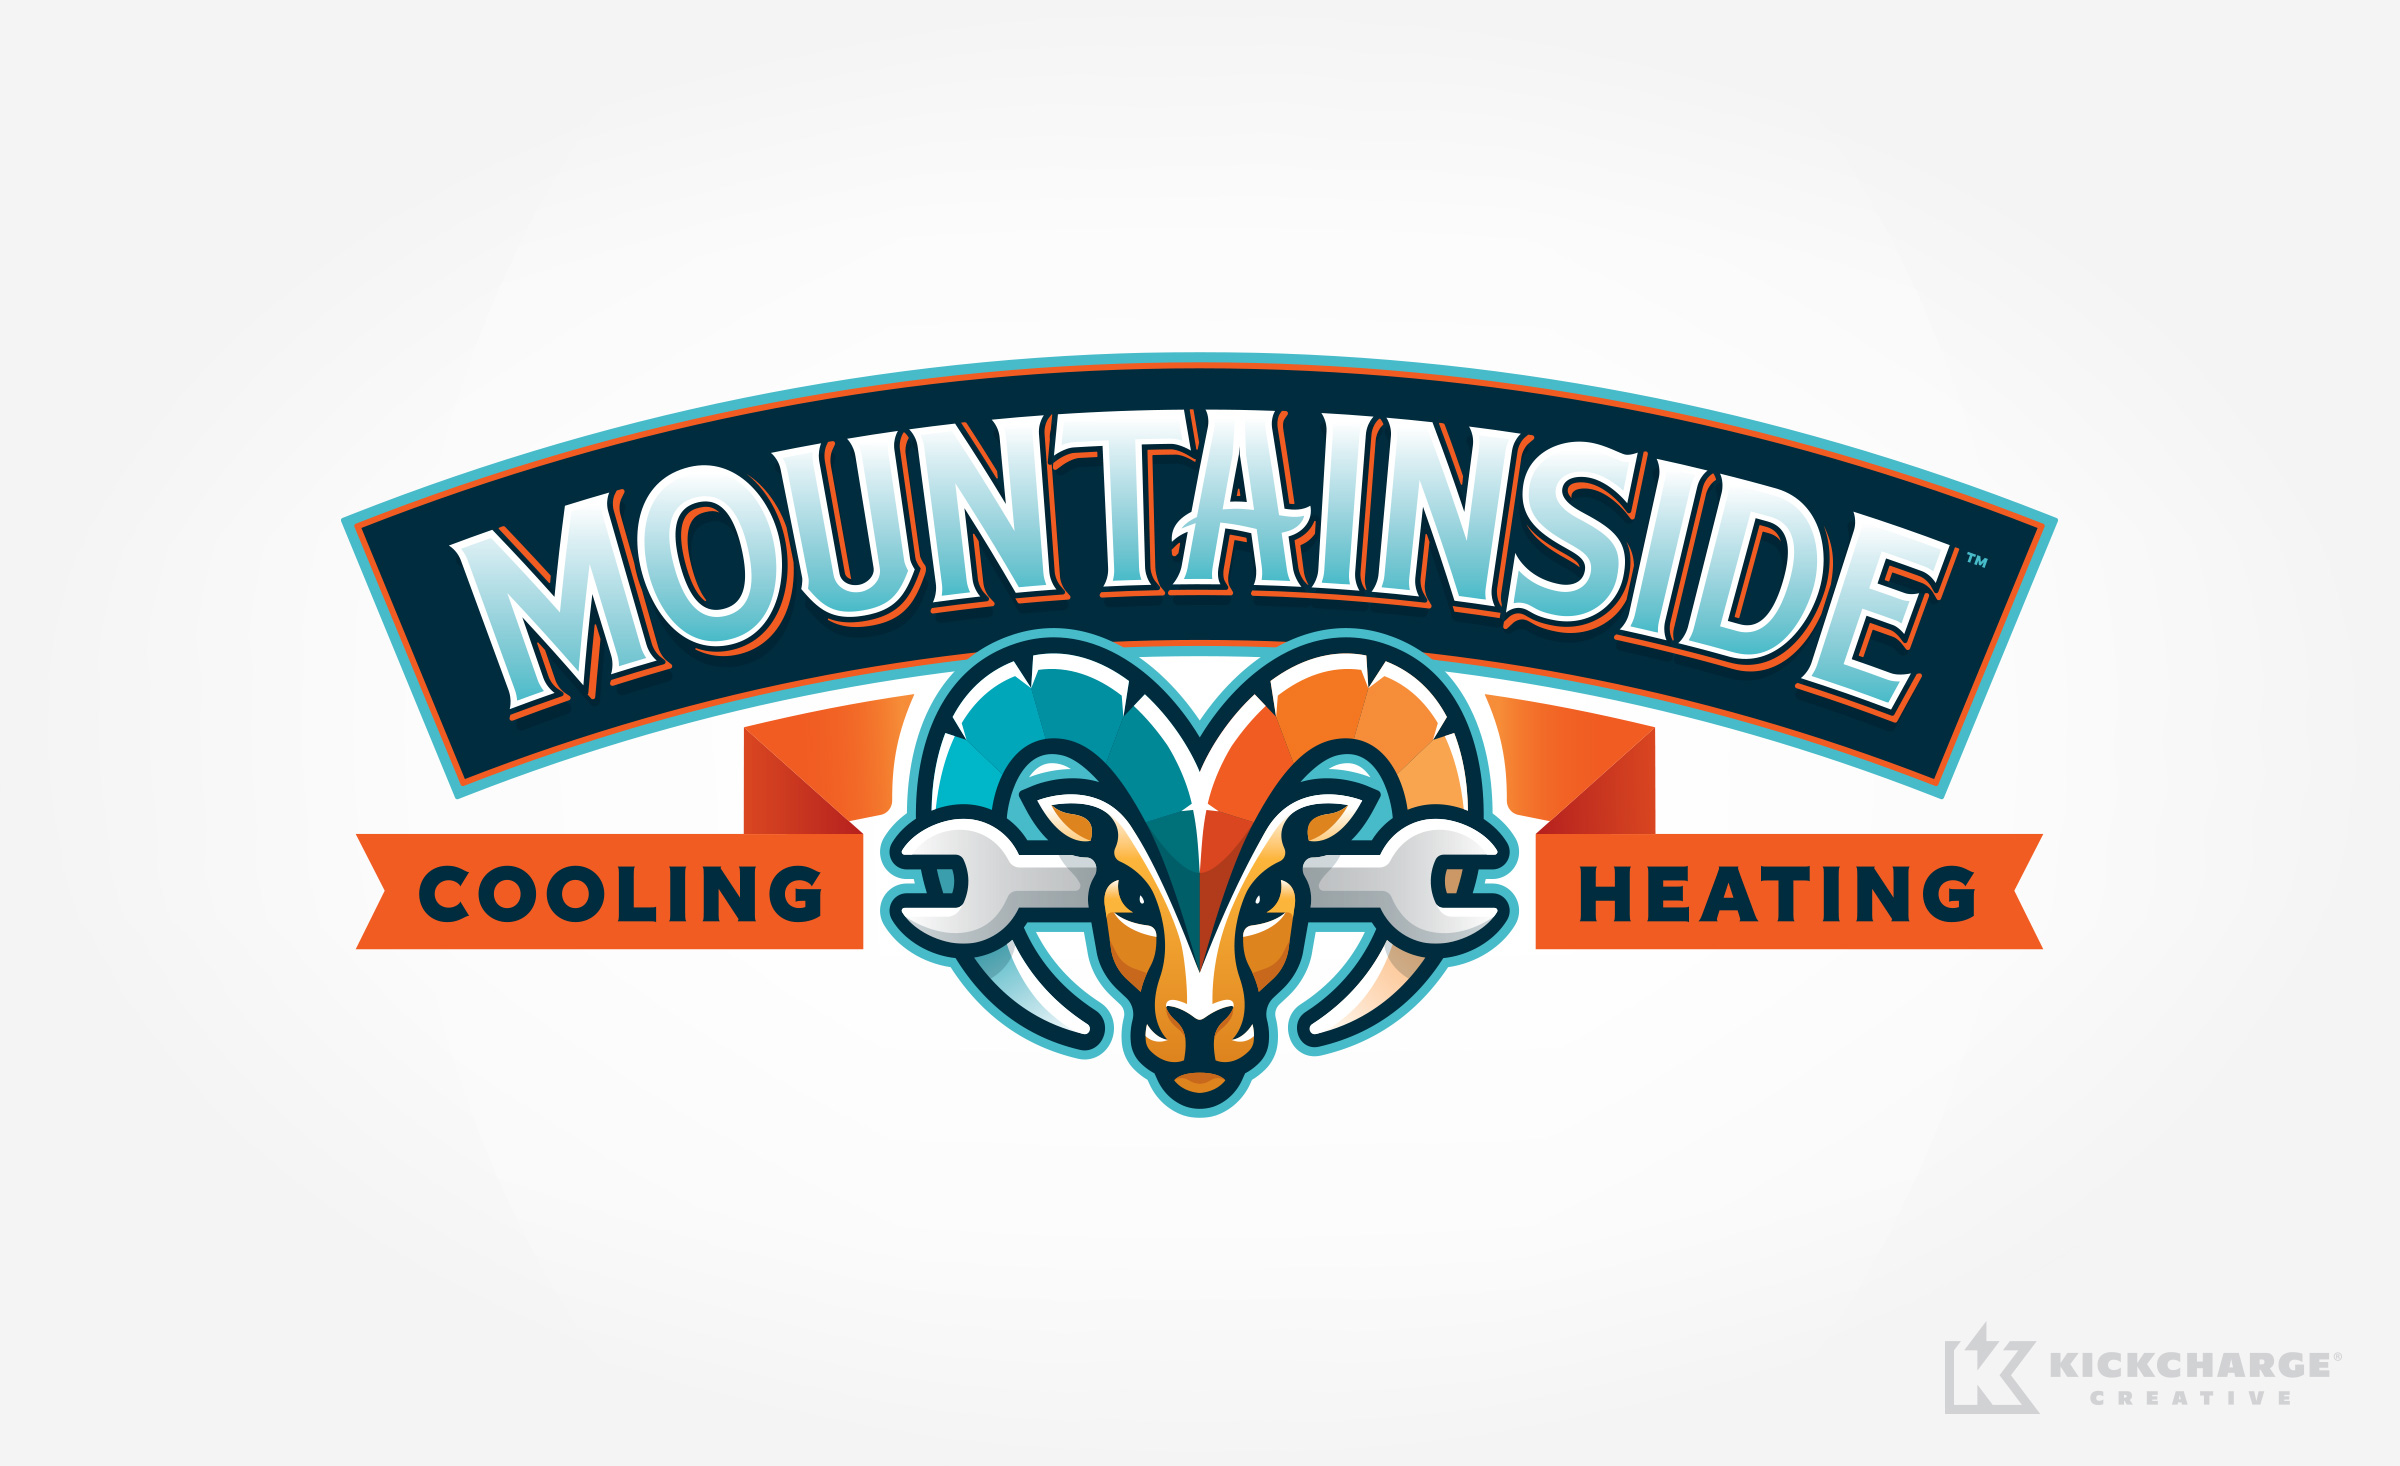 Mountainside Cooling & Heating